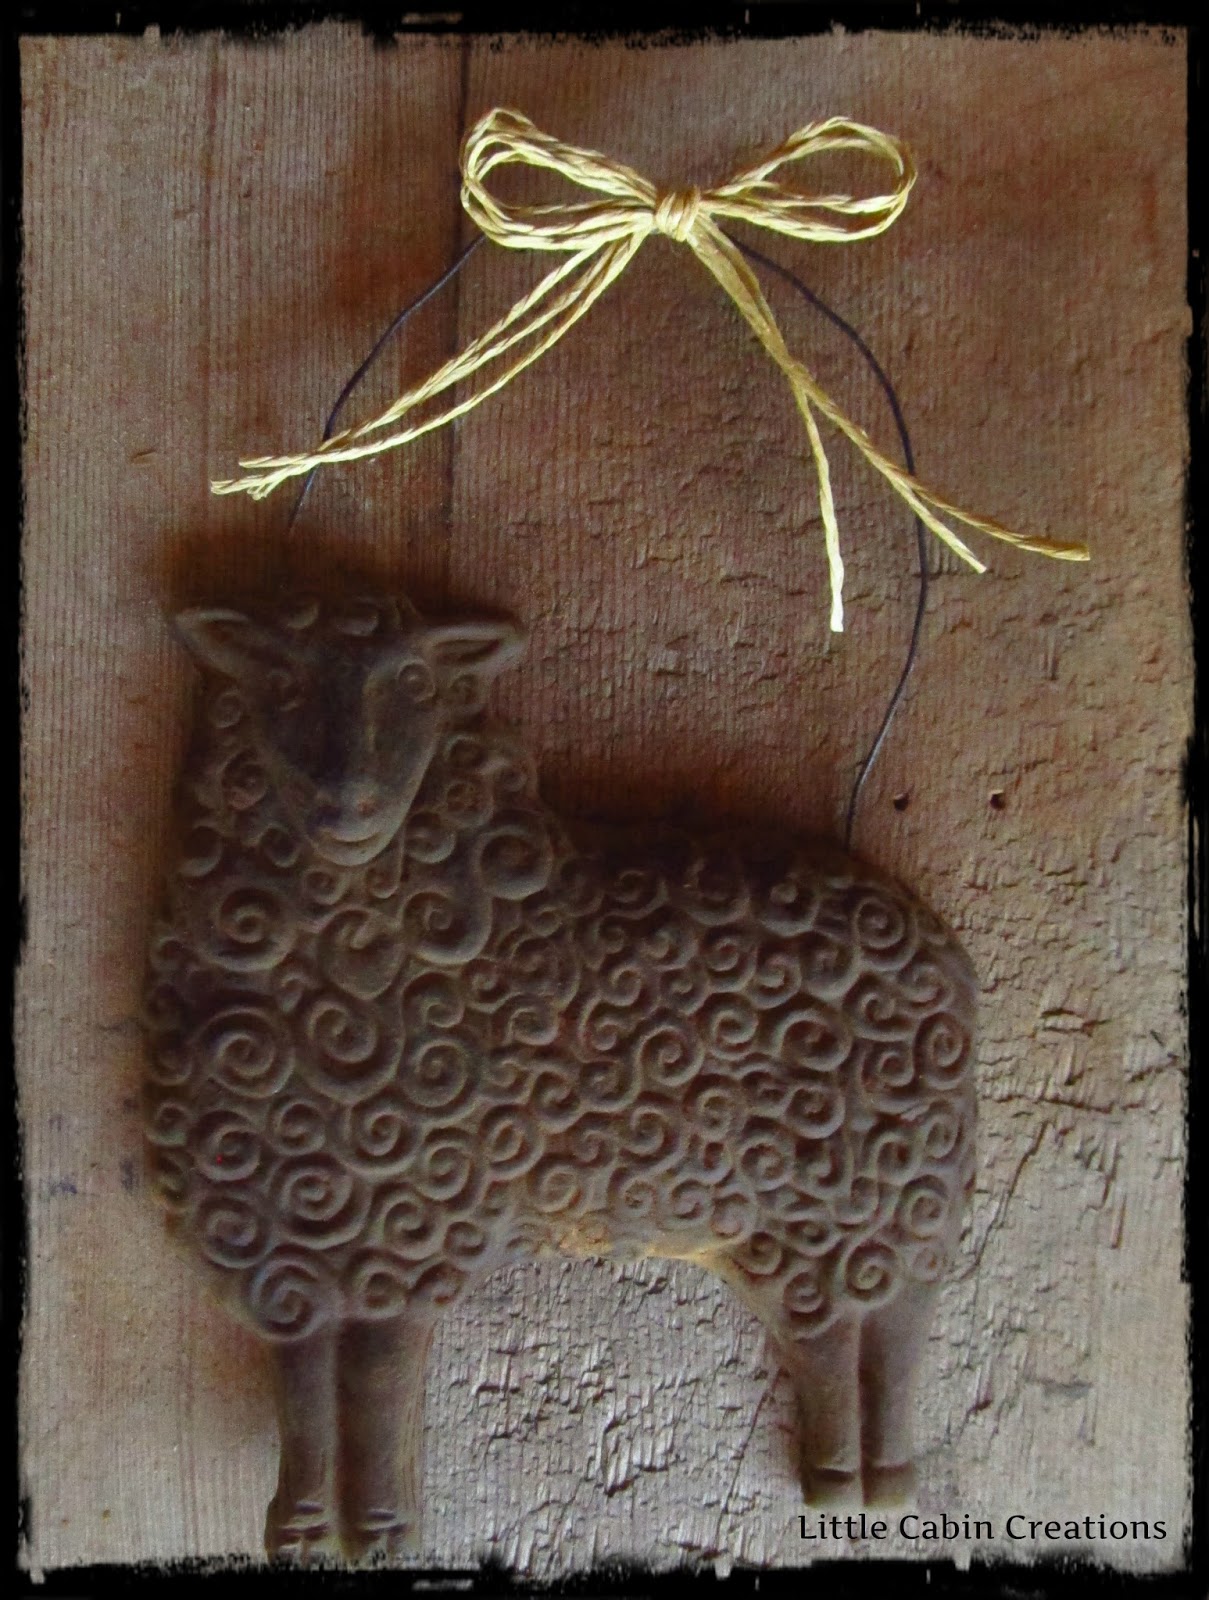 MAKE DO DOLLS: How To Make Blackened Beeswax & Natural Beeswax Ornaments  With Brown Bag Molds